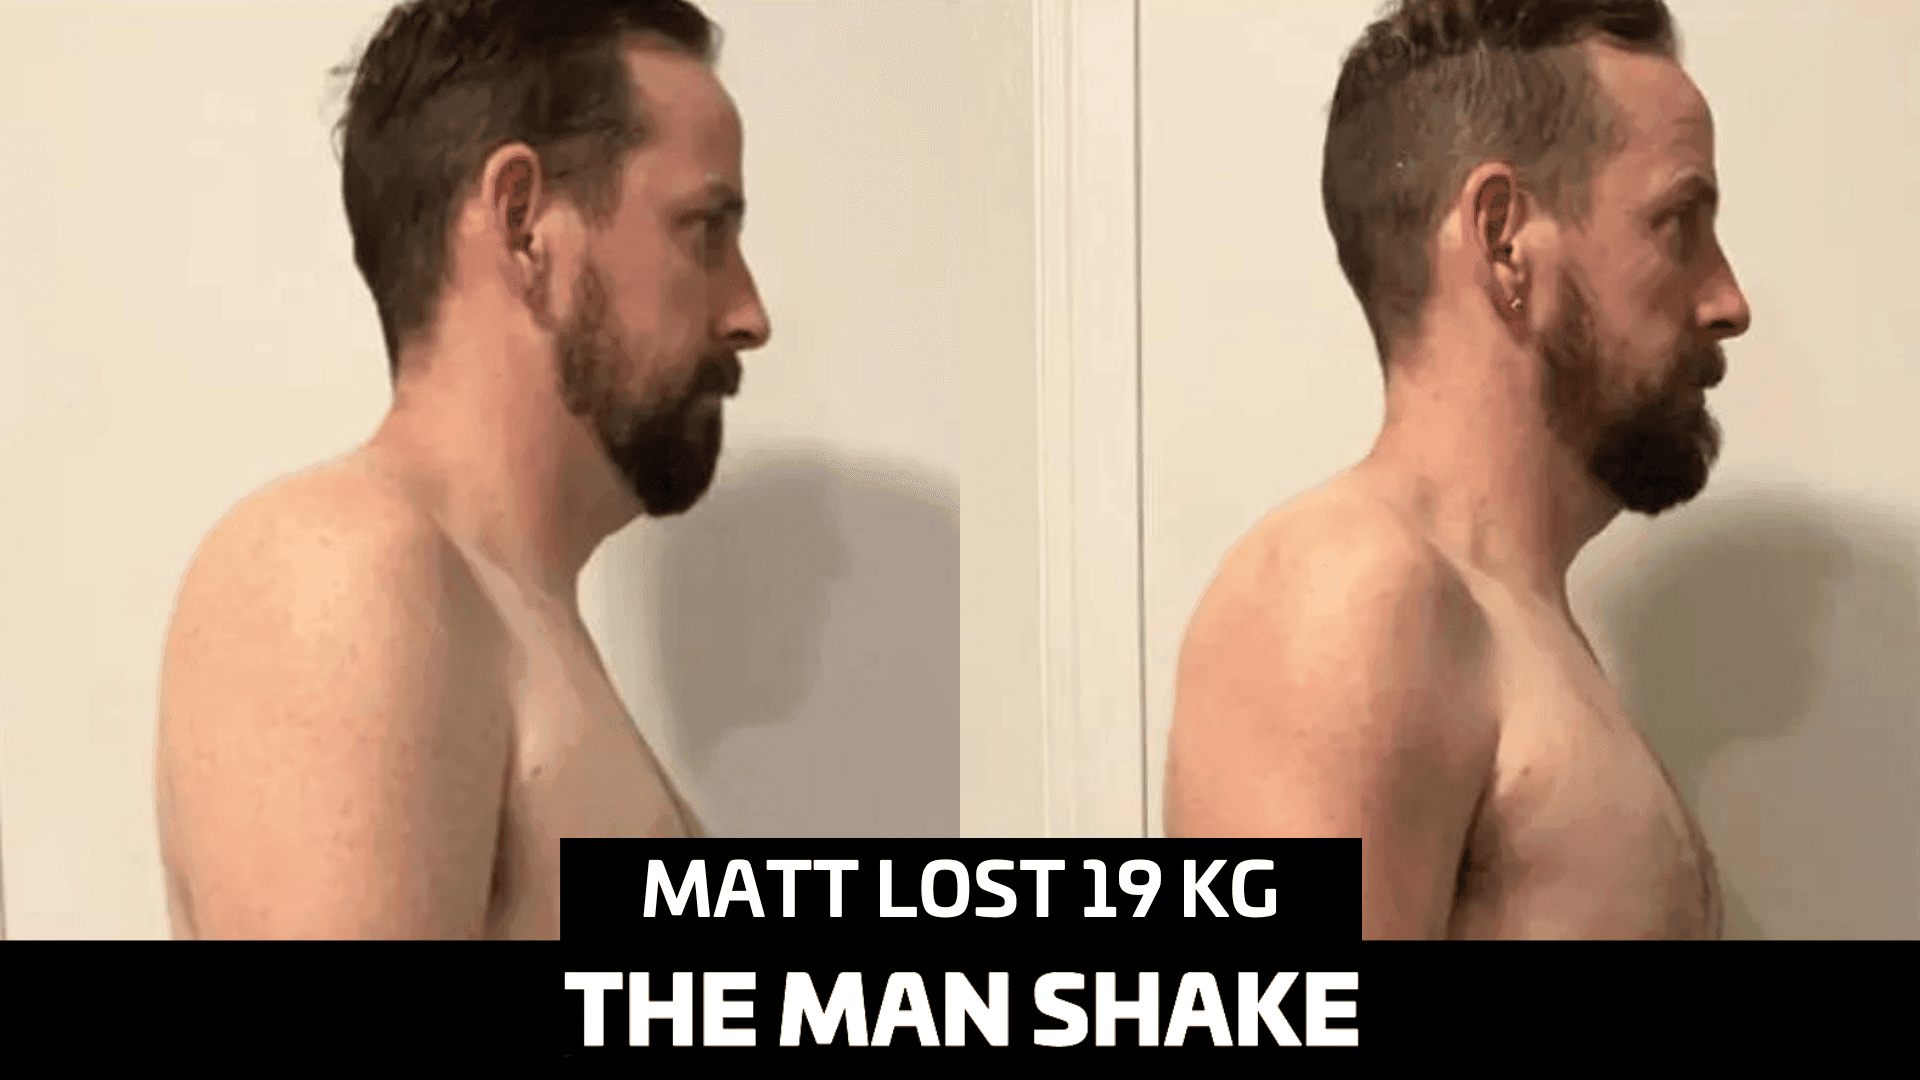 Matt wanted to be a good example for his kids so he lost 19kg!